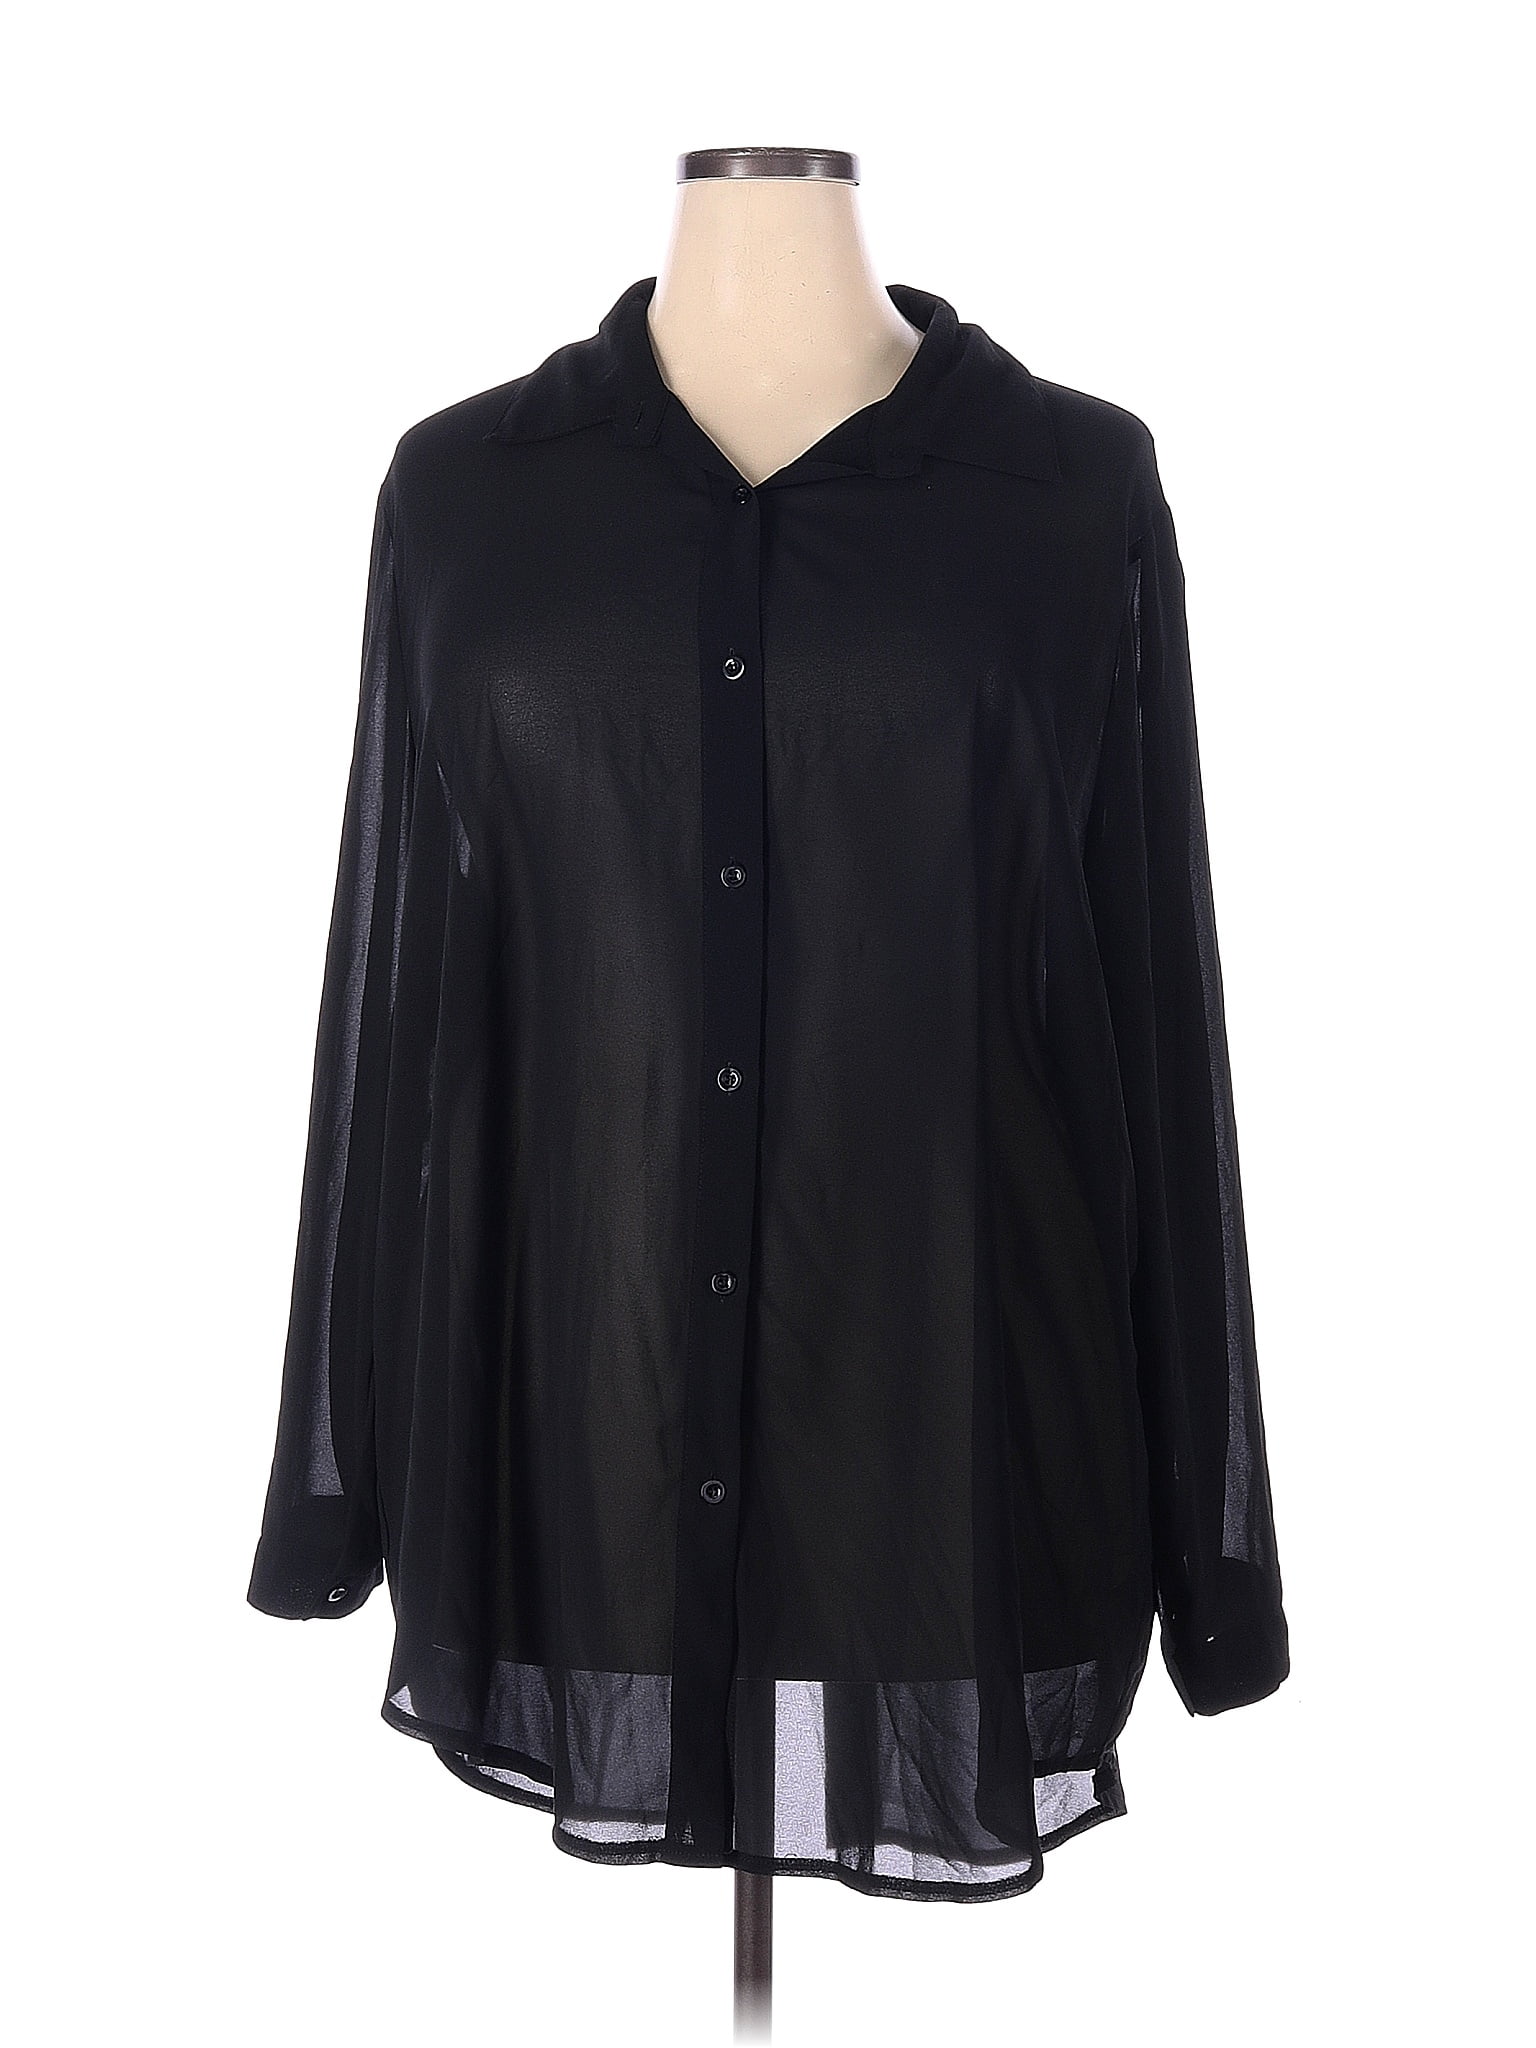 Shein 100% Polyester Black Long Sleeve Blouse Size 4X (Plus) - 50% off ...